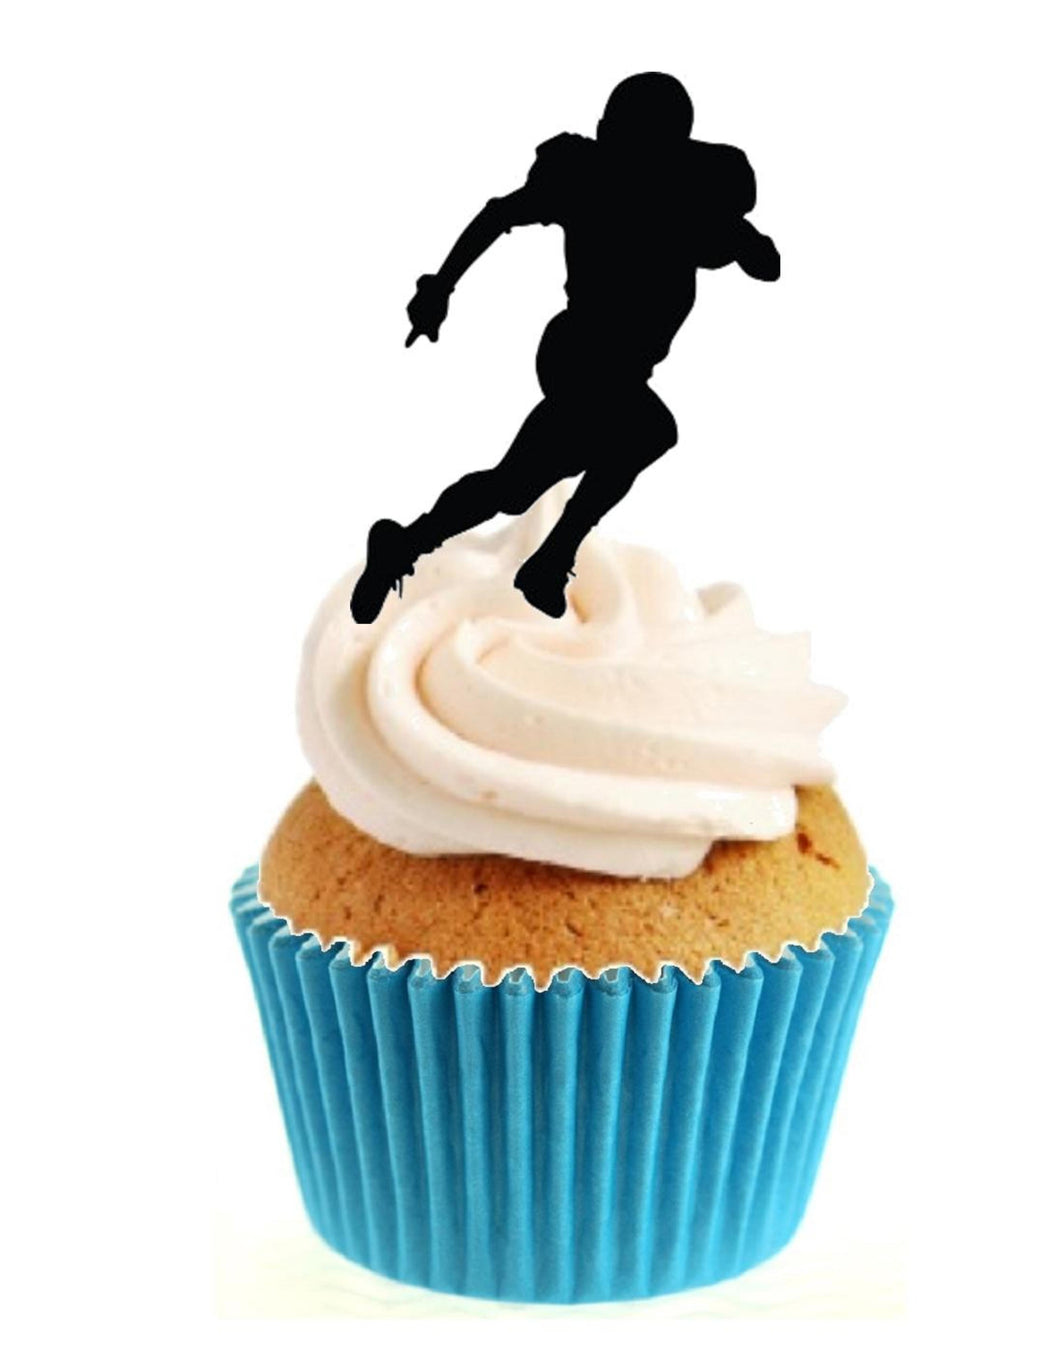 American Football SilhouetteStand Up Cake Toppers (12 pack)  Pack contains 12 images printed onto premium wafer card